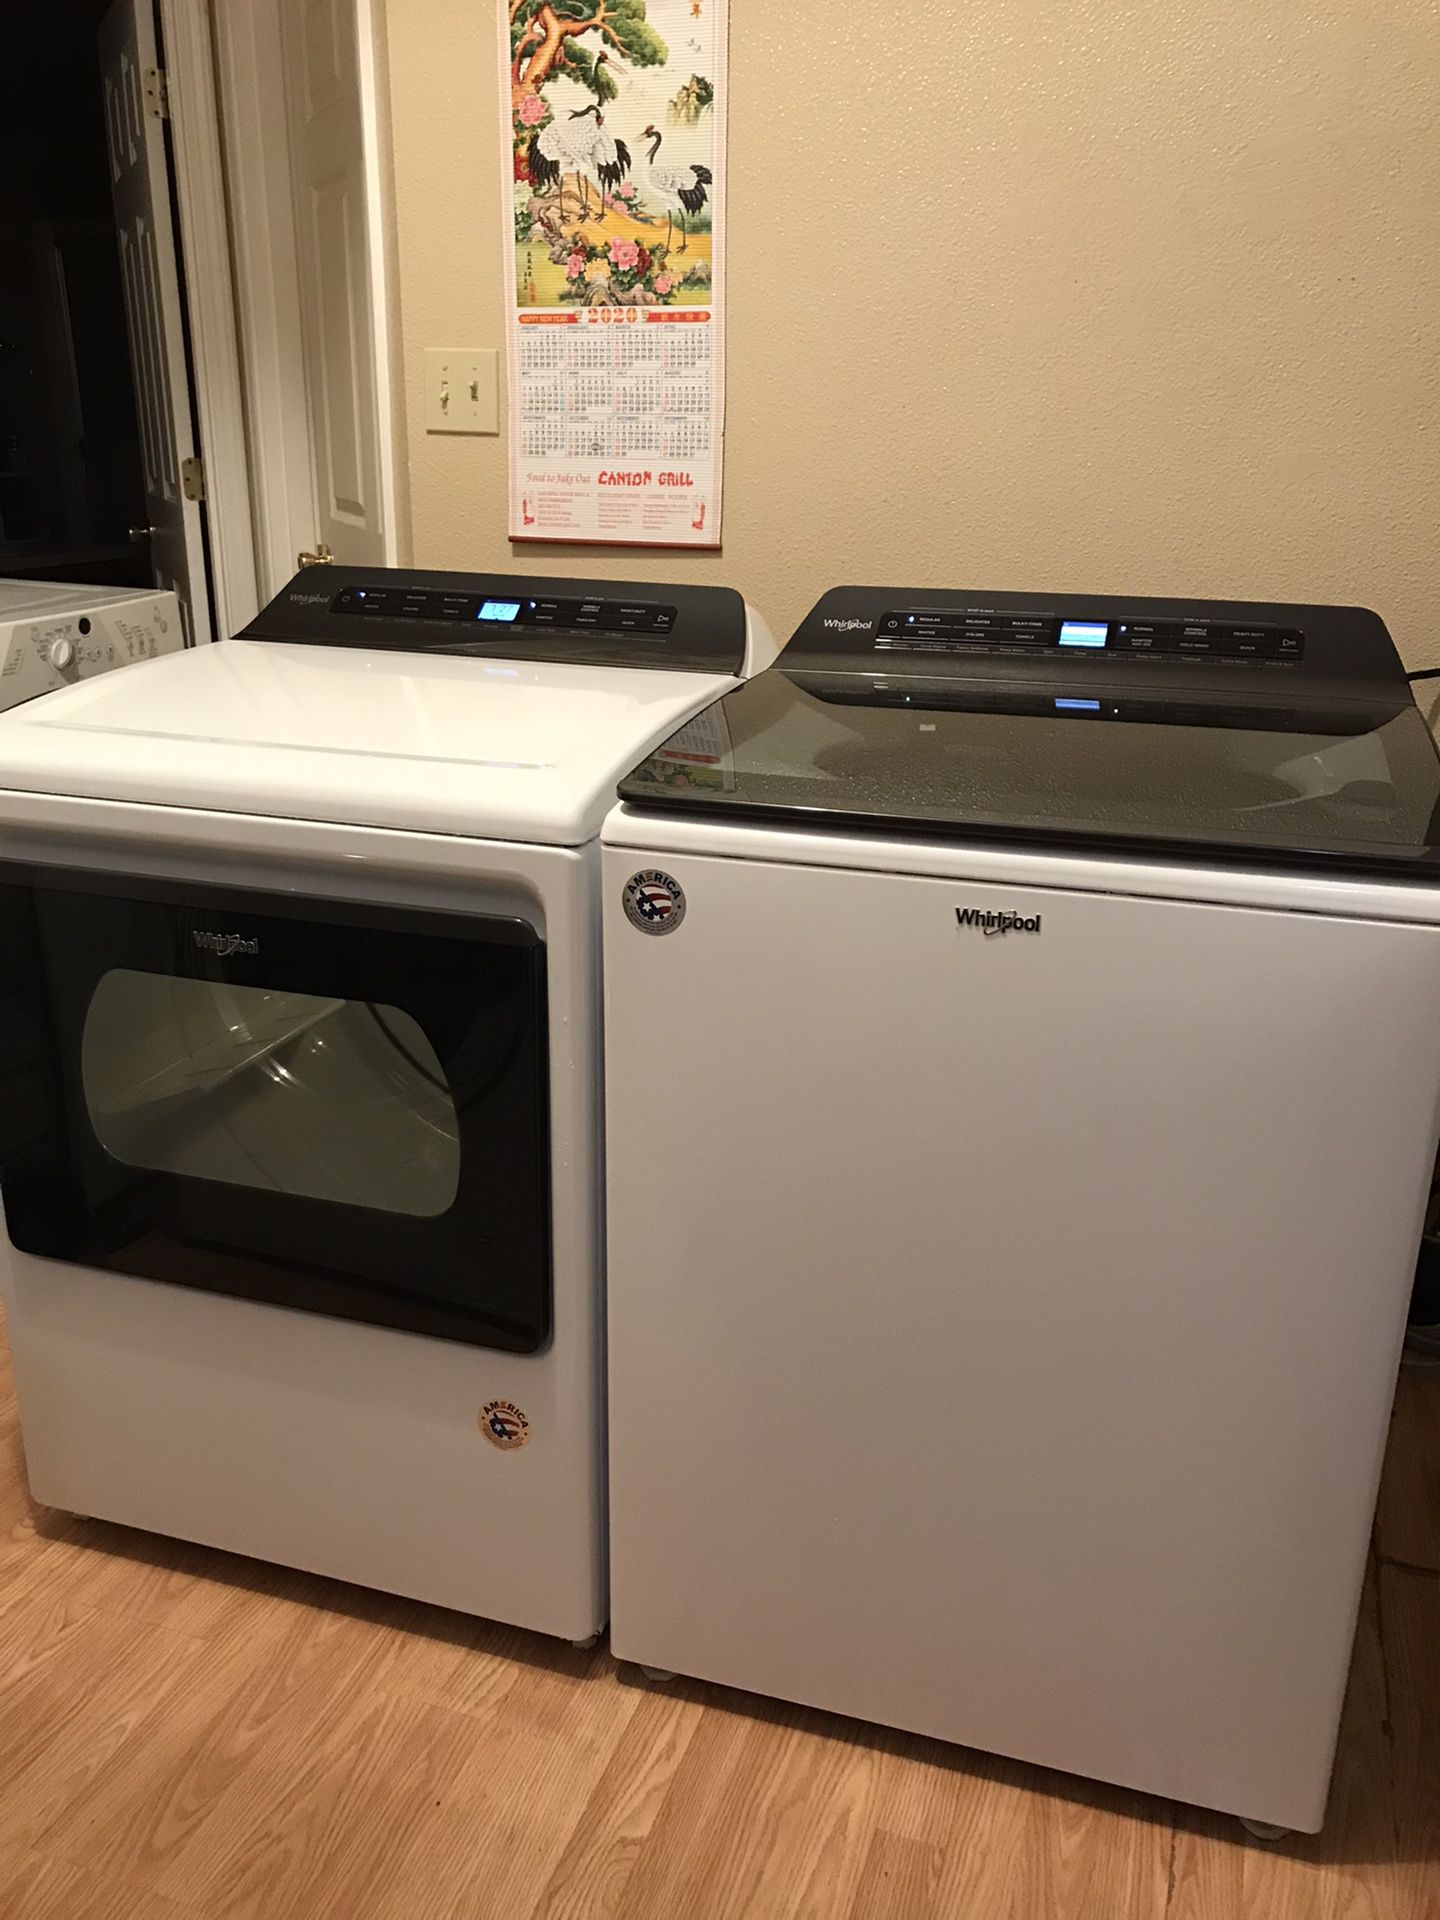 Whirlpool Large capacity-washer and dryer set